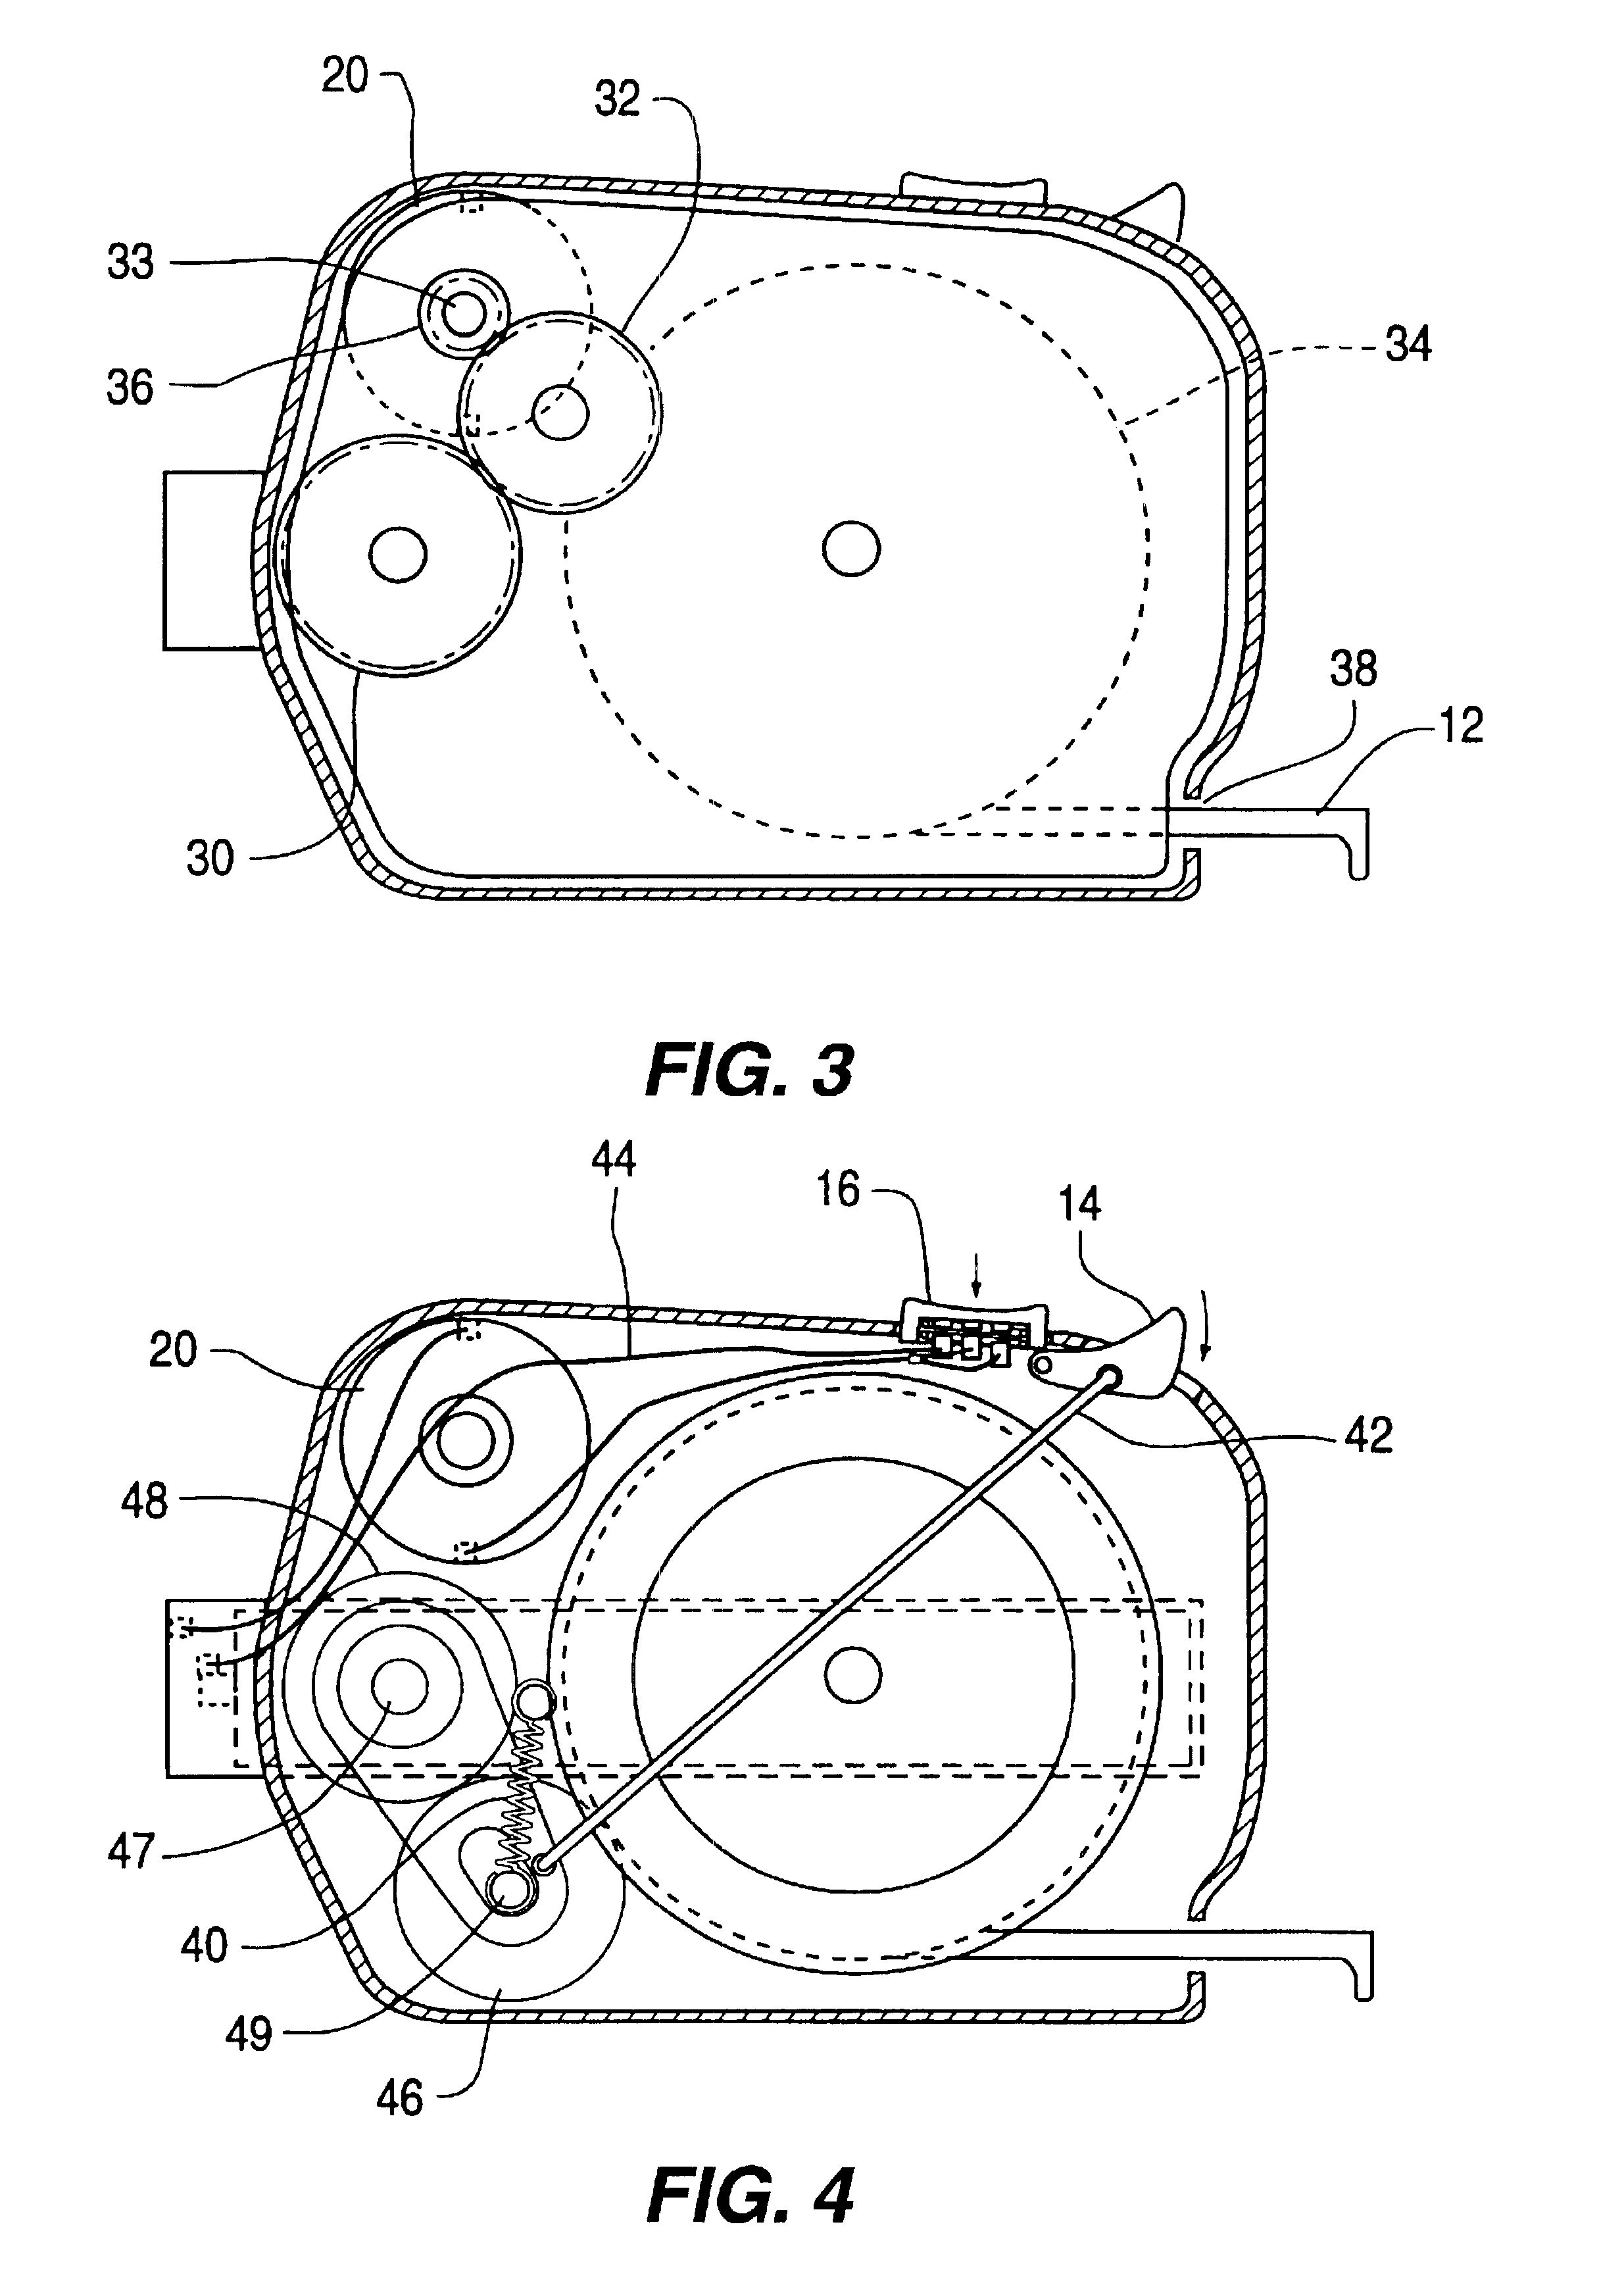 Power operated tape measure